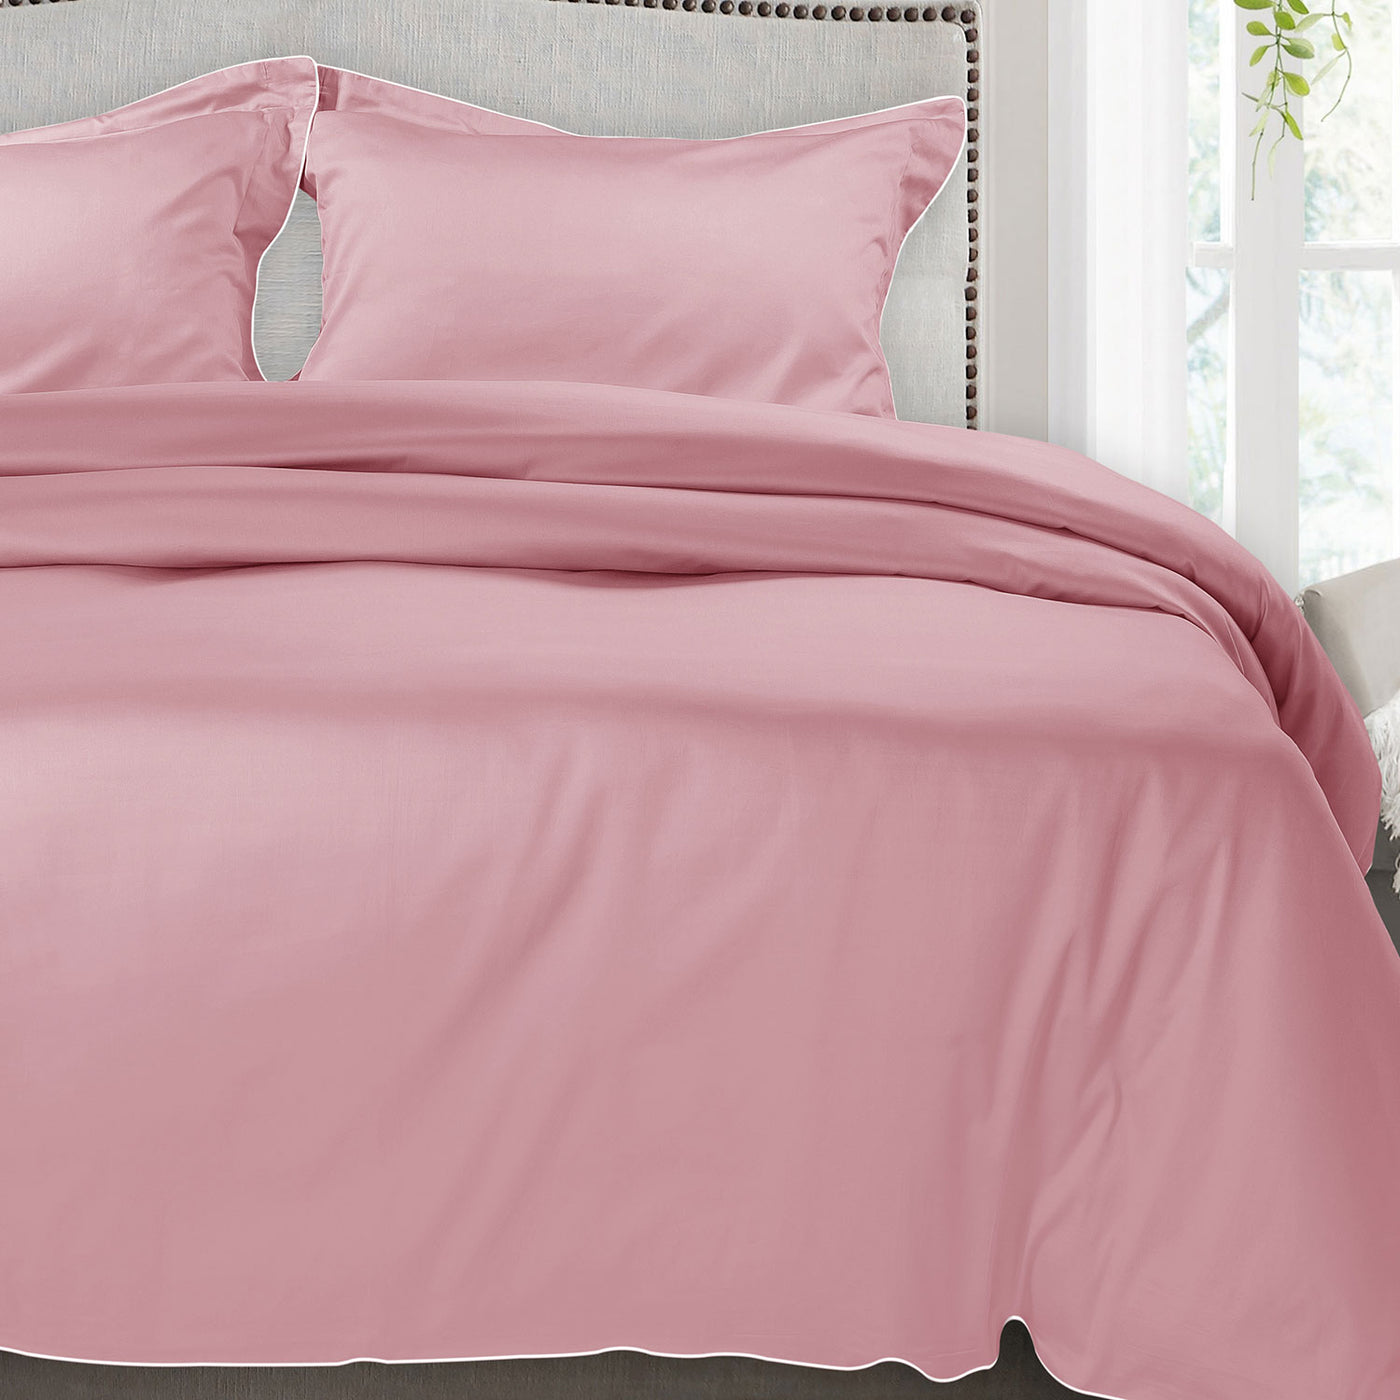 500 THREAD COUNT ITALIAN COTTON PINK BEDSHEETS